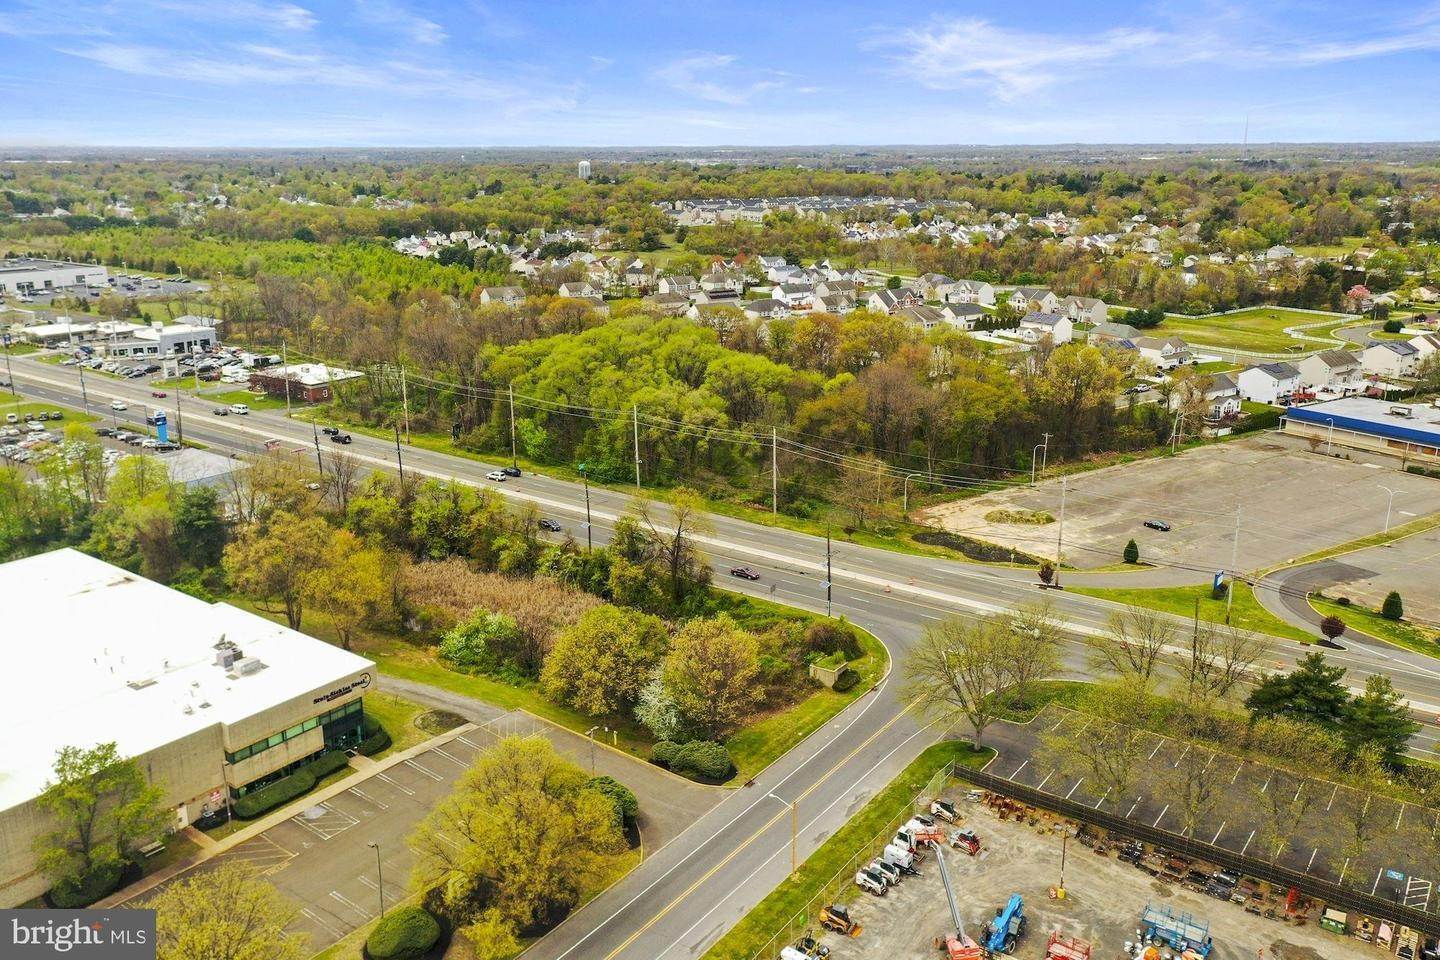 3. Land / Commercial for Sale at ROUTE 130 Burlington, New Jersey 08016 United States